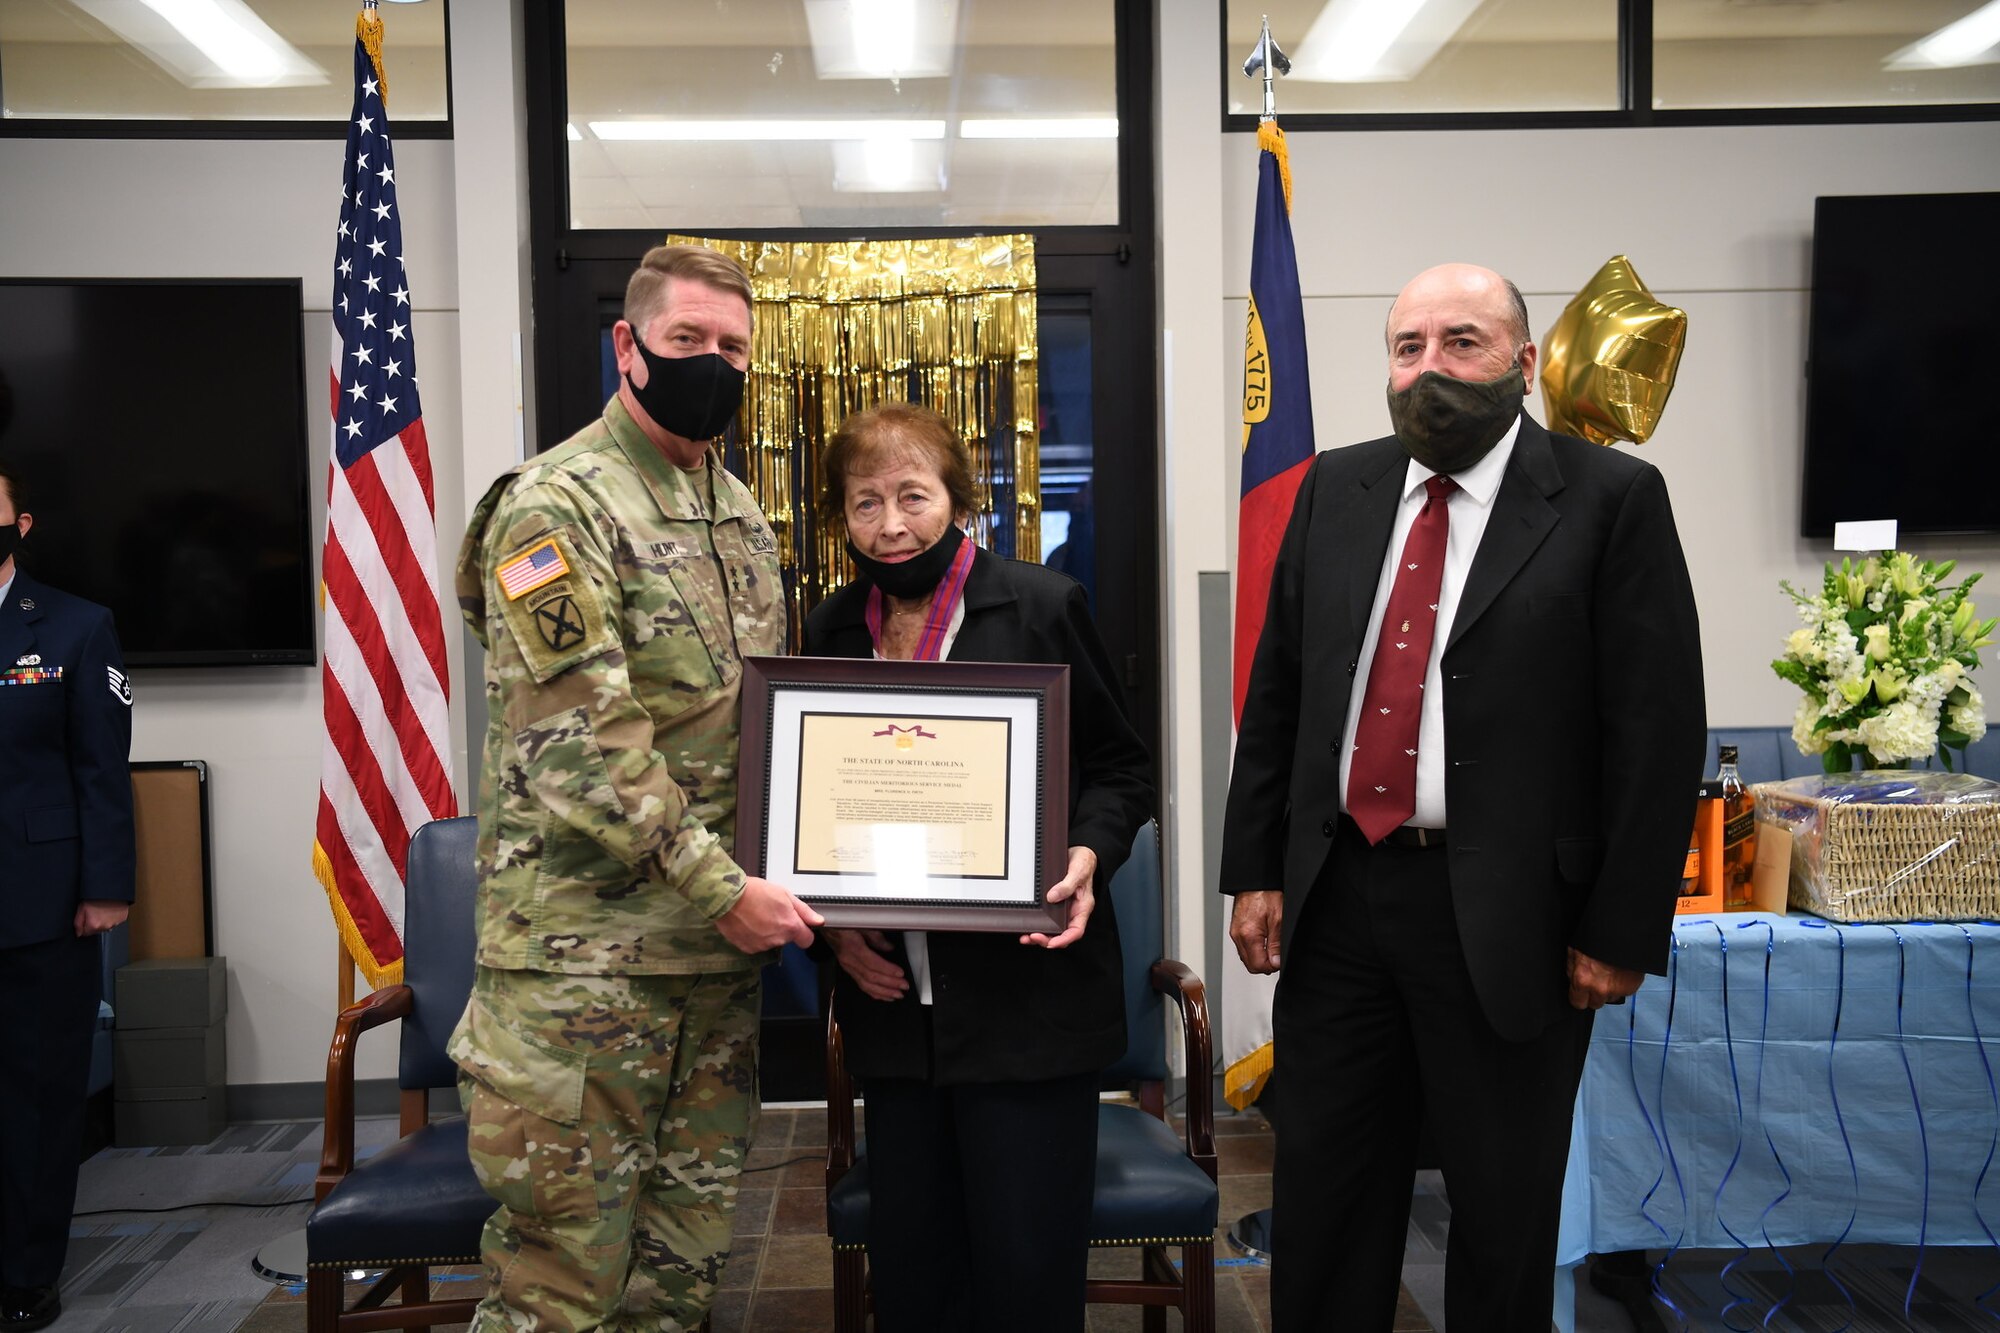 Army Maj. Gen. Todd Hunt (left), the North Carolina National Guard Adjutant General, presents an award certificate to Mrs. Jere Firth (middle) one of the longest employed civilians in the department of defense in recognition of her retirement after over 59 years of service, at the NCANG Base, Charlotte Douglas International Airport, Nov. 19, 2021. Mrs. Firth has worked specifically for the North Carolina Air National Guard since 1972